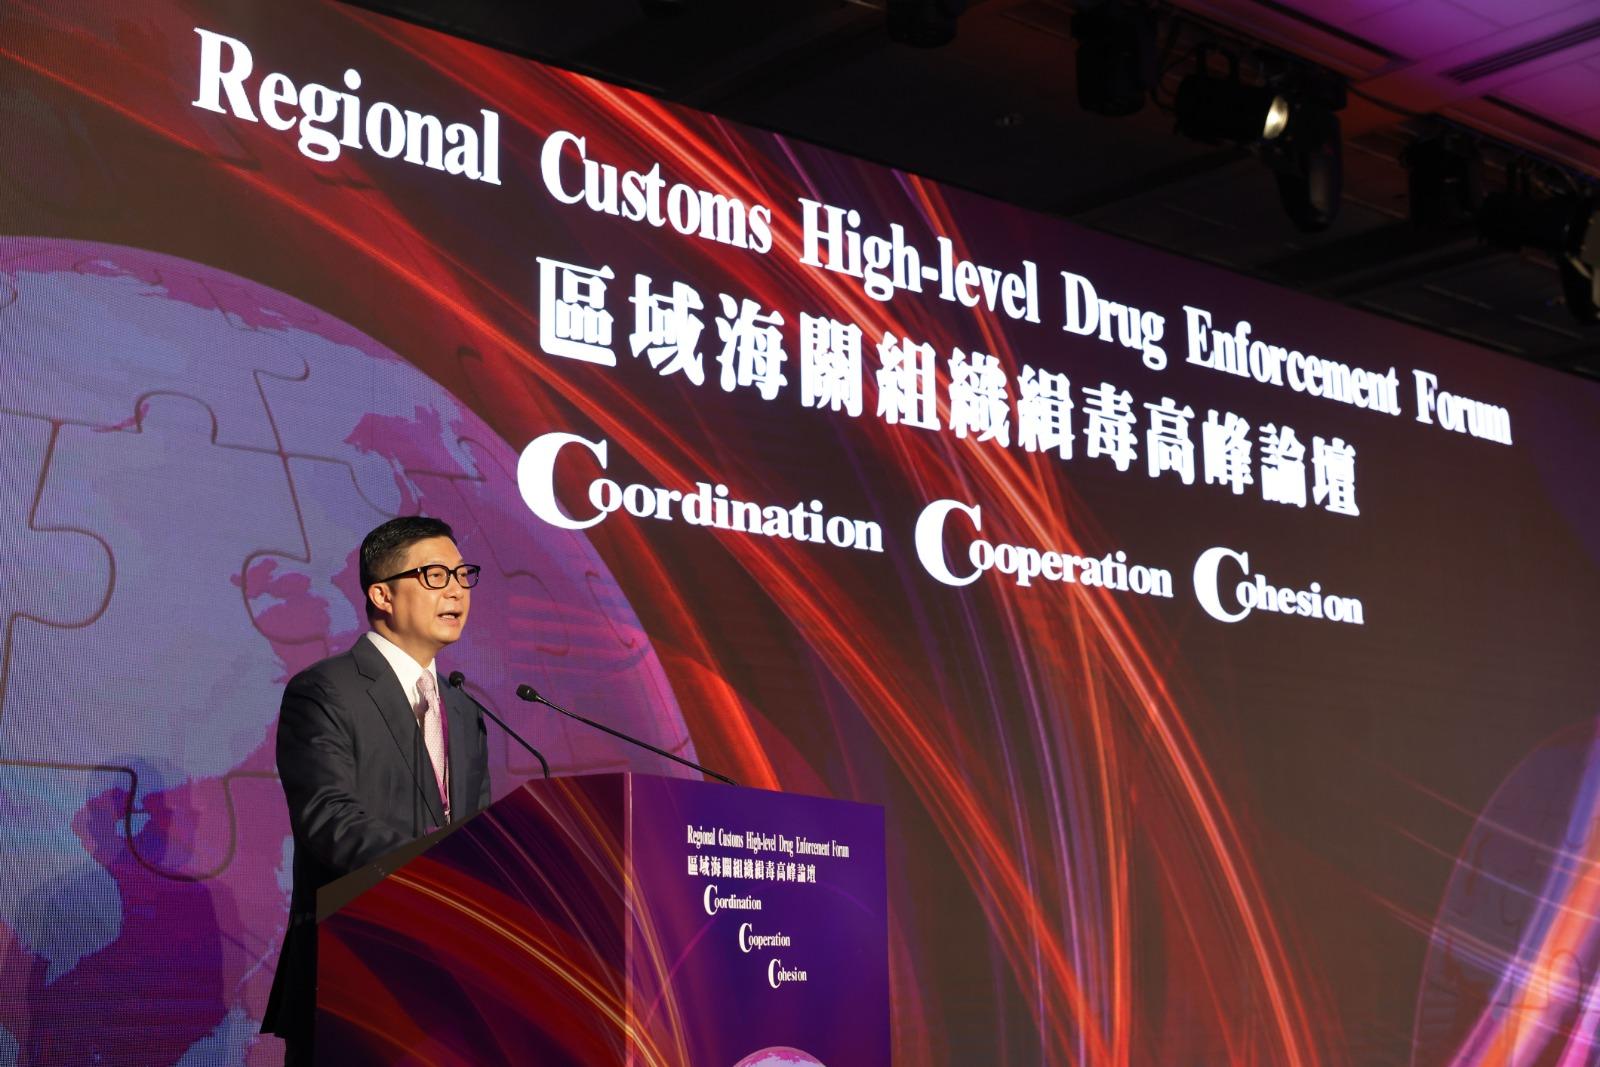 The Secretary for Security, Mr Tang Ping-keung, participated in the Regional Customs High-level Drug Enforcement Forum hosted by the Customs and Excise Department of Hong Kong this morning (February 16). Photo shows Mr Tang delivering a keynote speech at the forum.